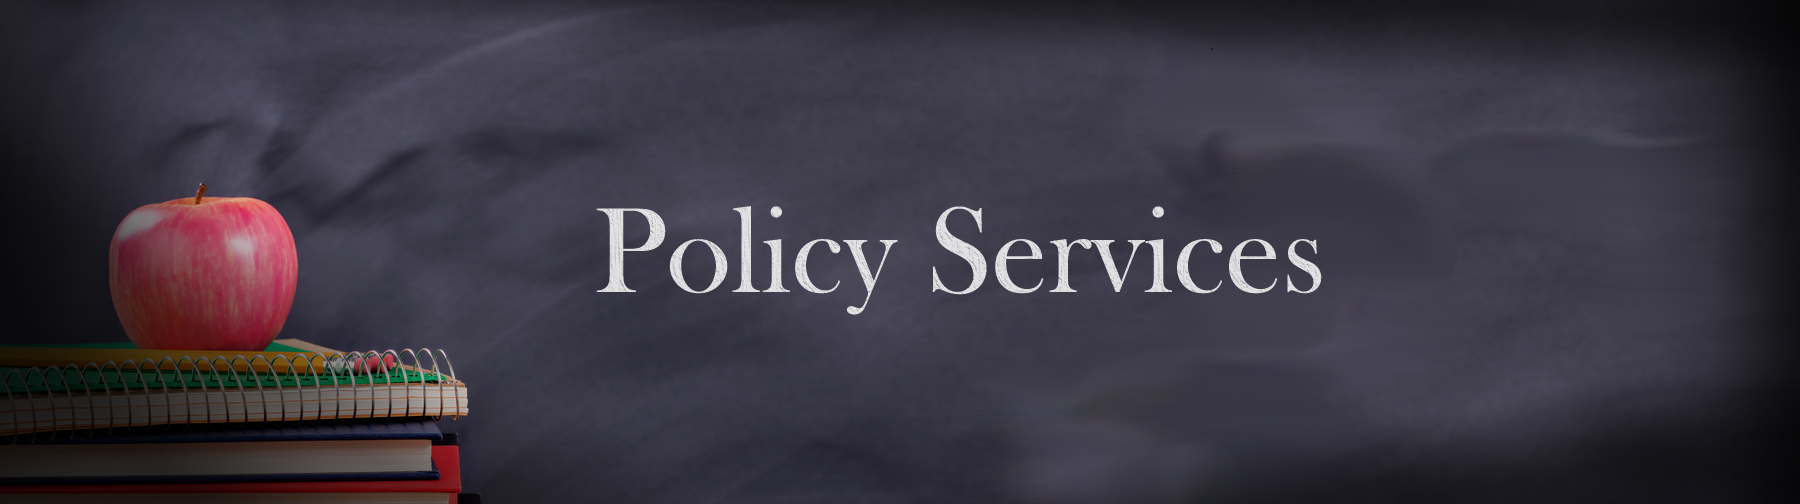 Policy Services Writen on Chalk Board